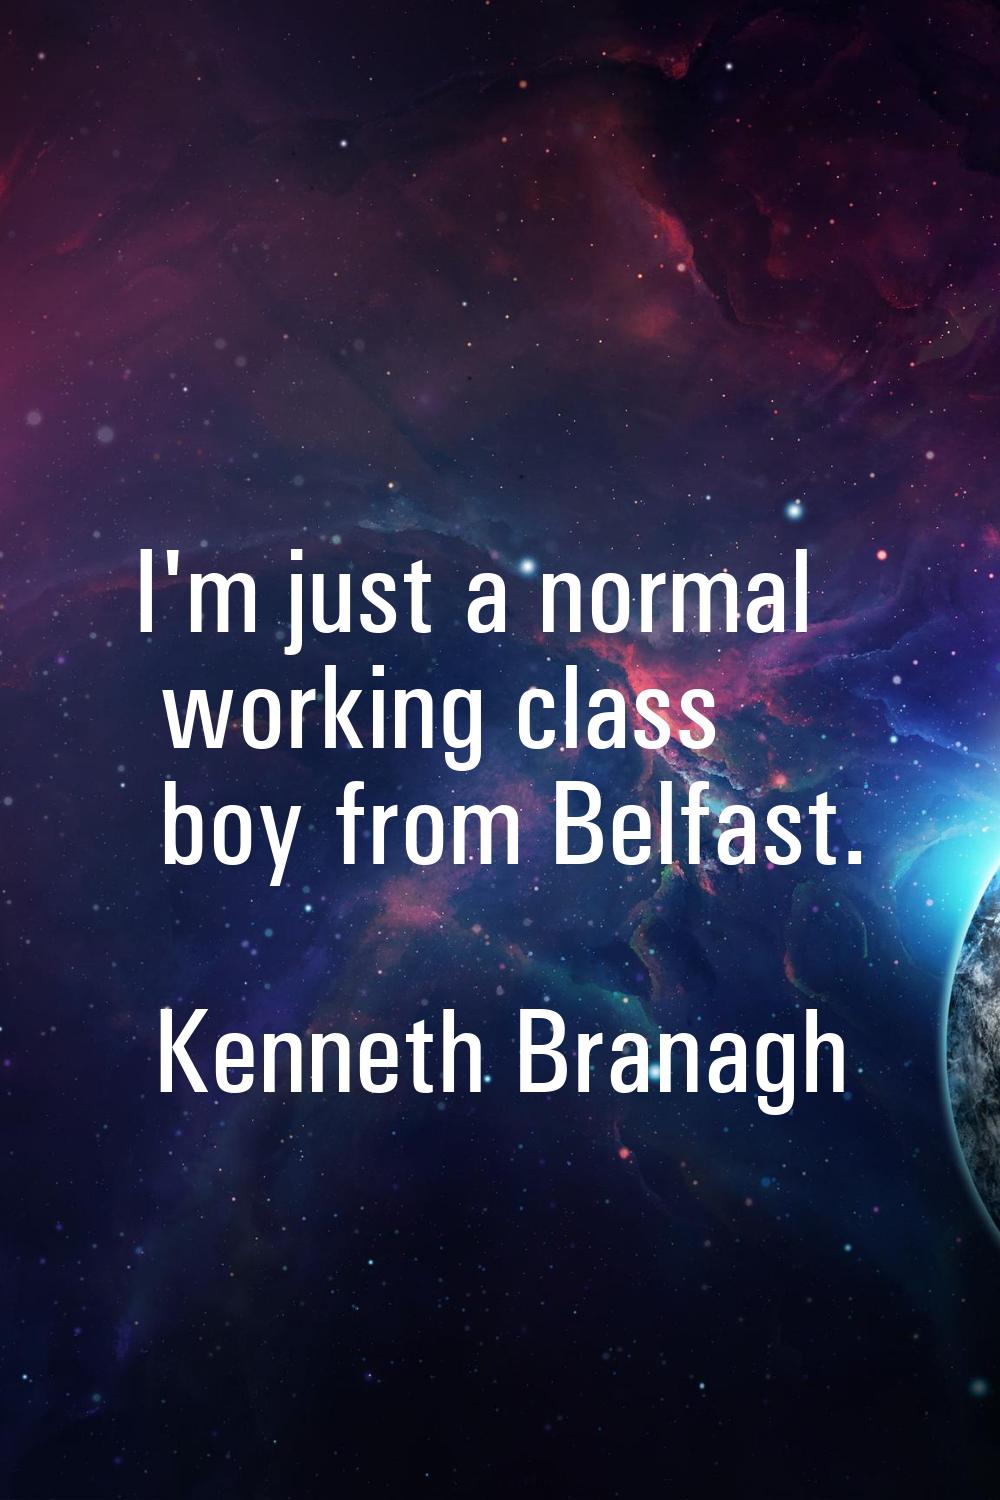 I'm just a normal working class boy from Belfast.